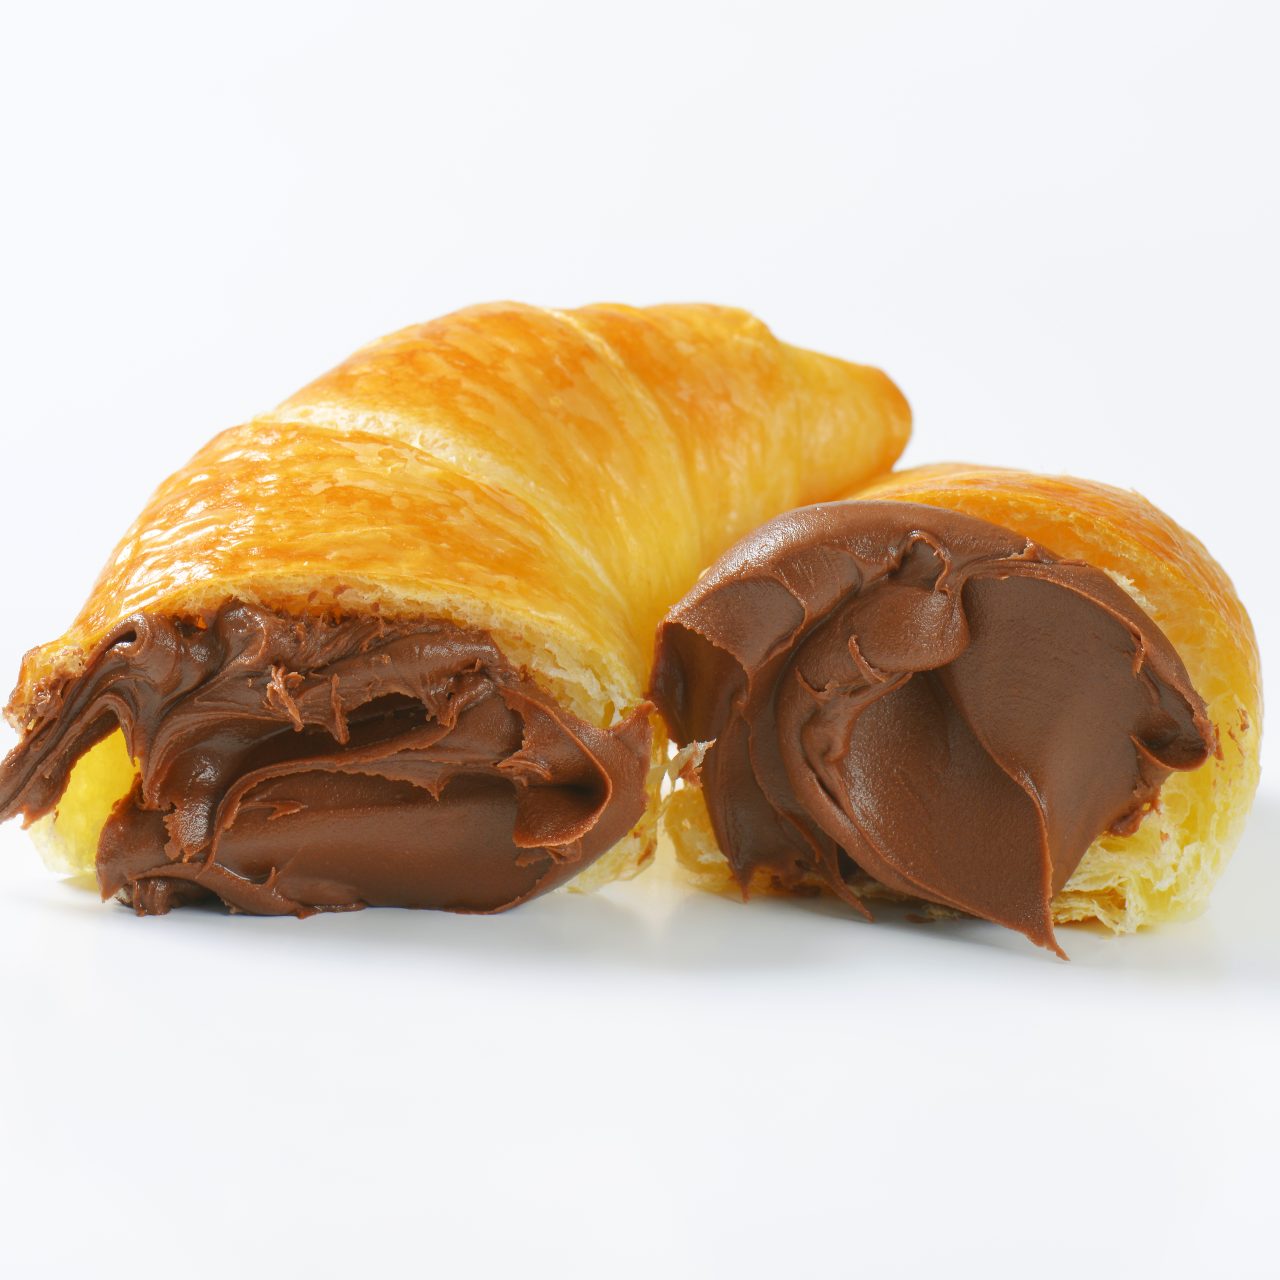 Croissants,With,Chocolate,Cream,On,White,Background